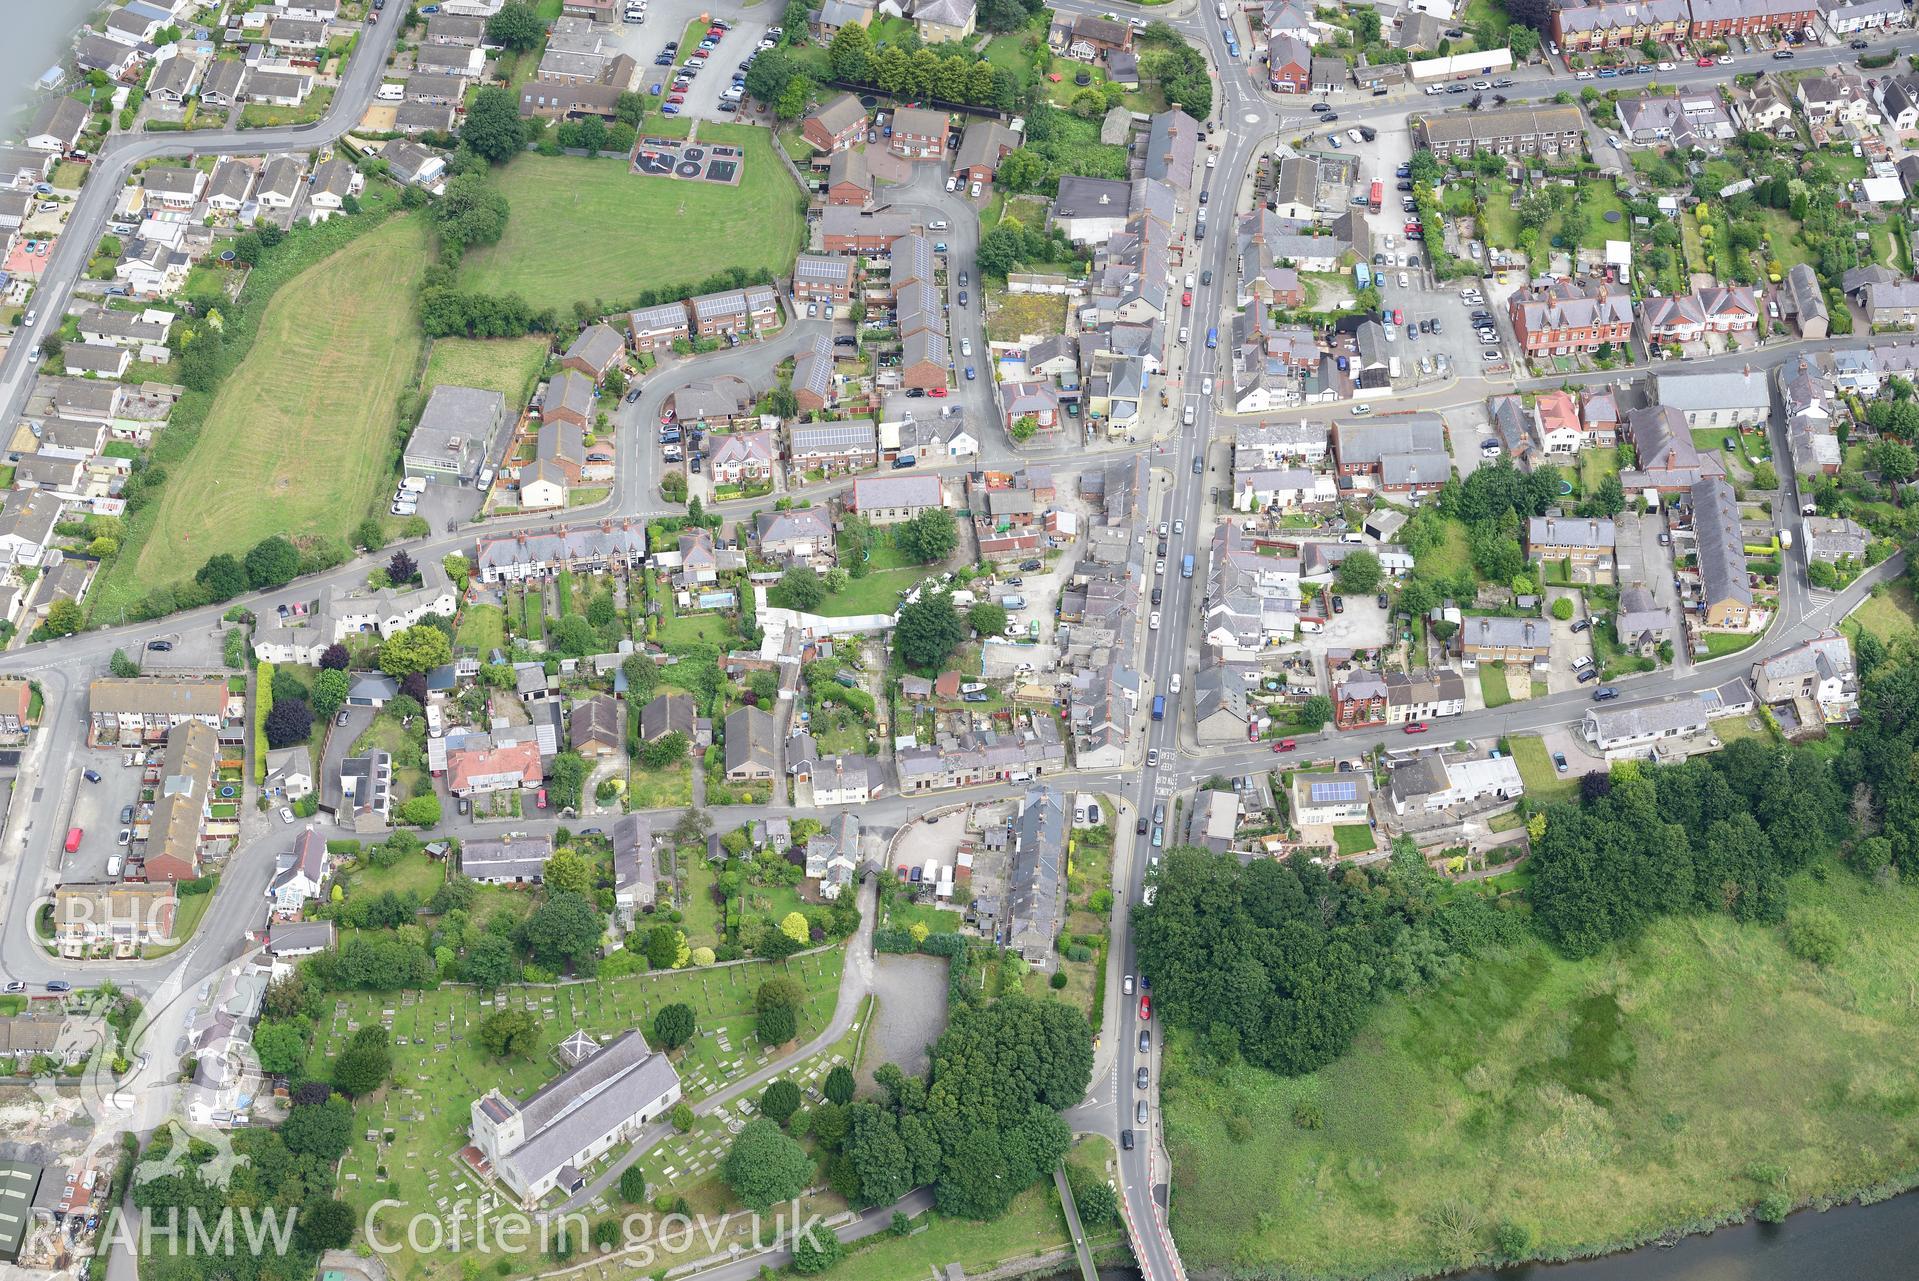 Edwardian town defences, St. Mary's Church, Ebenezer chapel and Tabernacle chapel, Rhuddlan. Oblique aerial photograph taken during the Royal Commission's programme of archaeological aerial reconnaissance by Toby Driver on 30th July 2015.